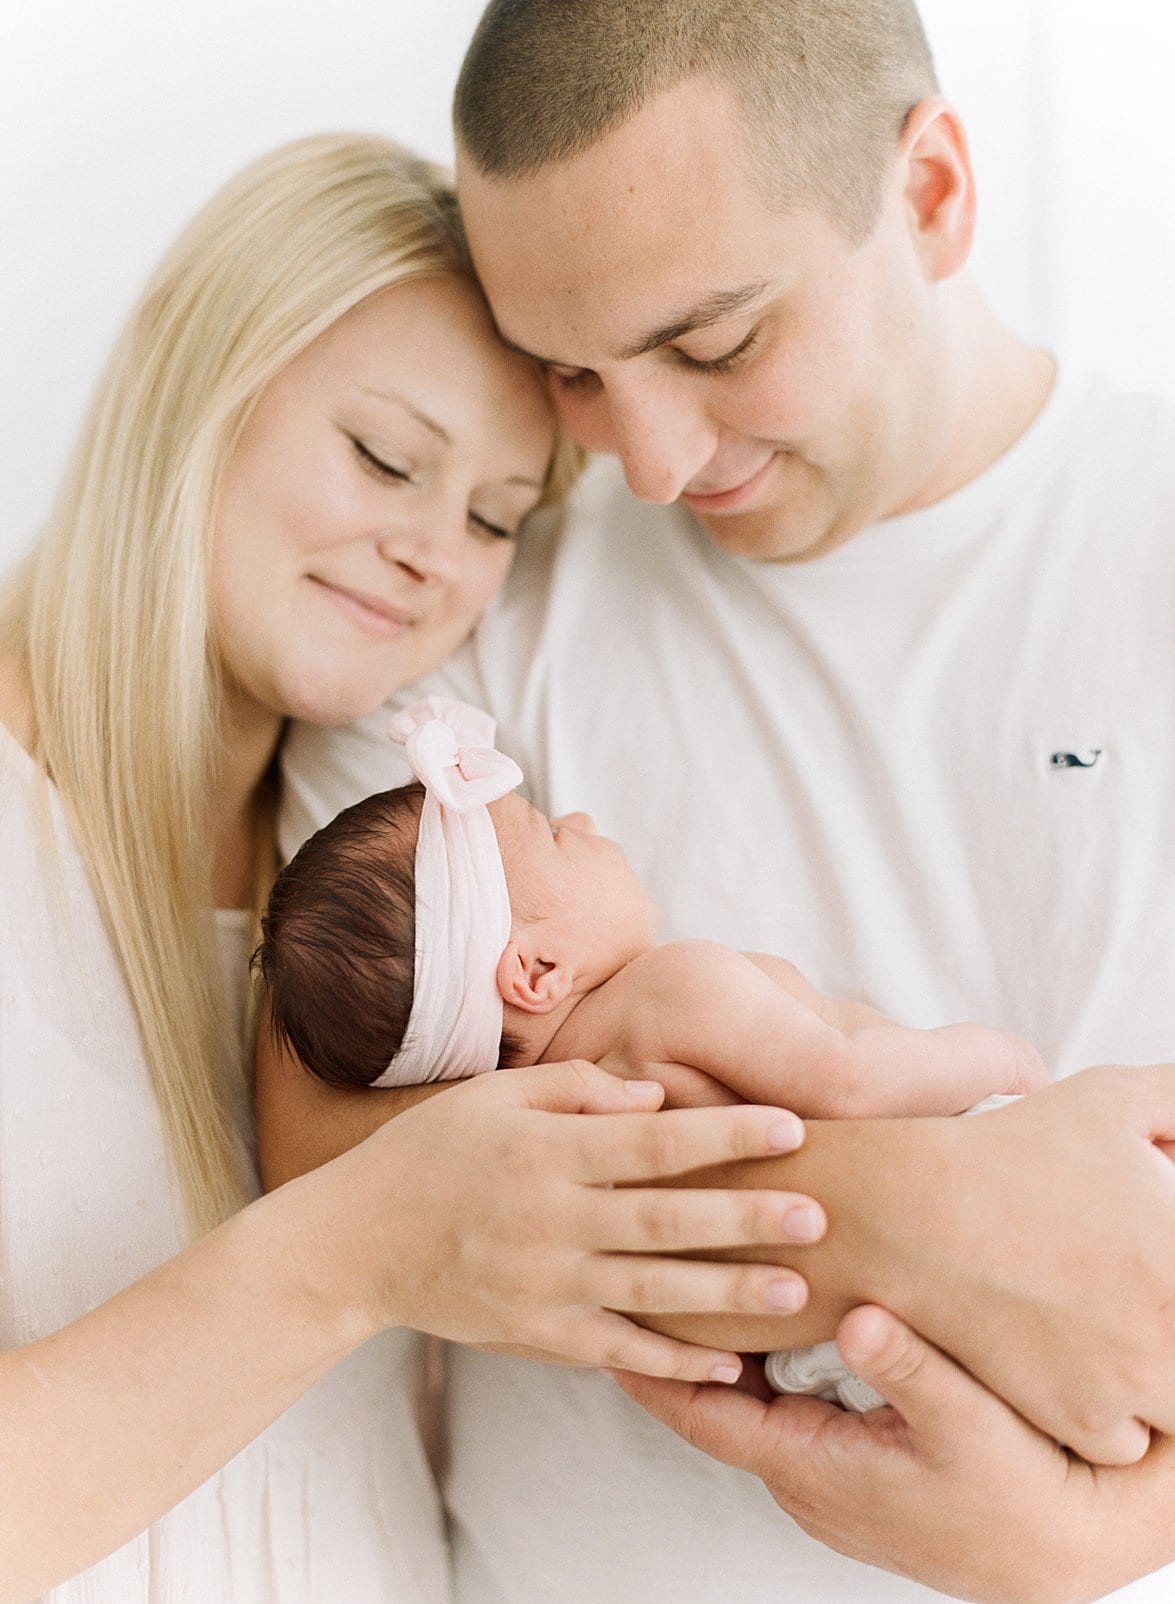 Film newborn pictures with father holding his newborn daughter while the mother snuggles in photo